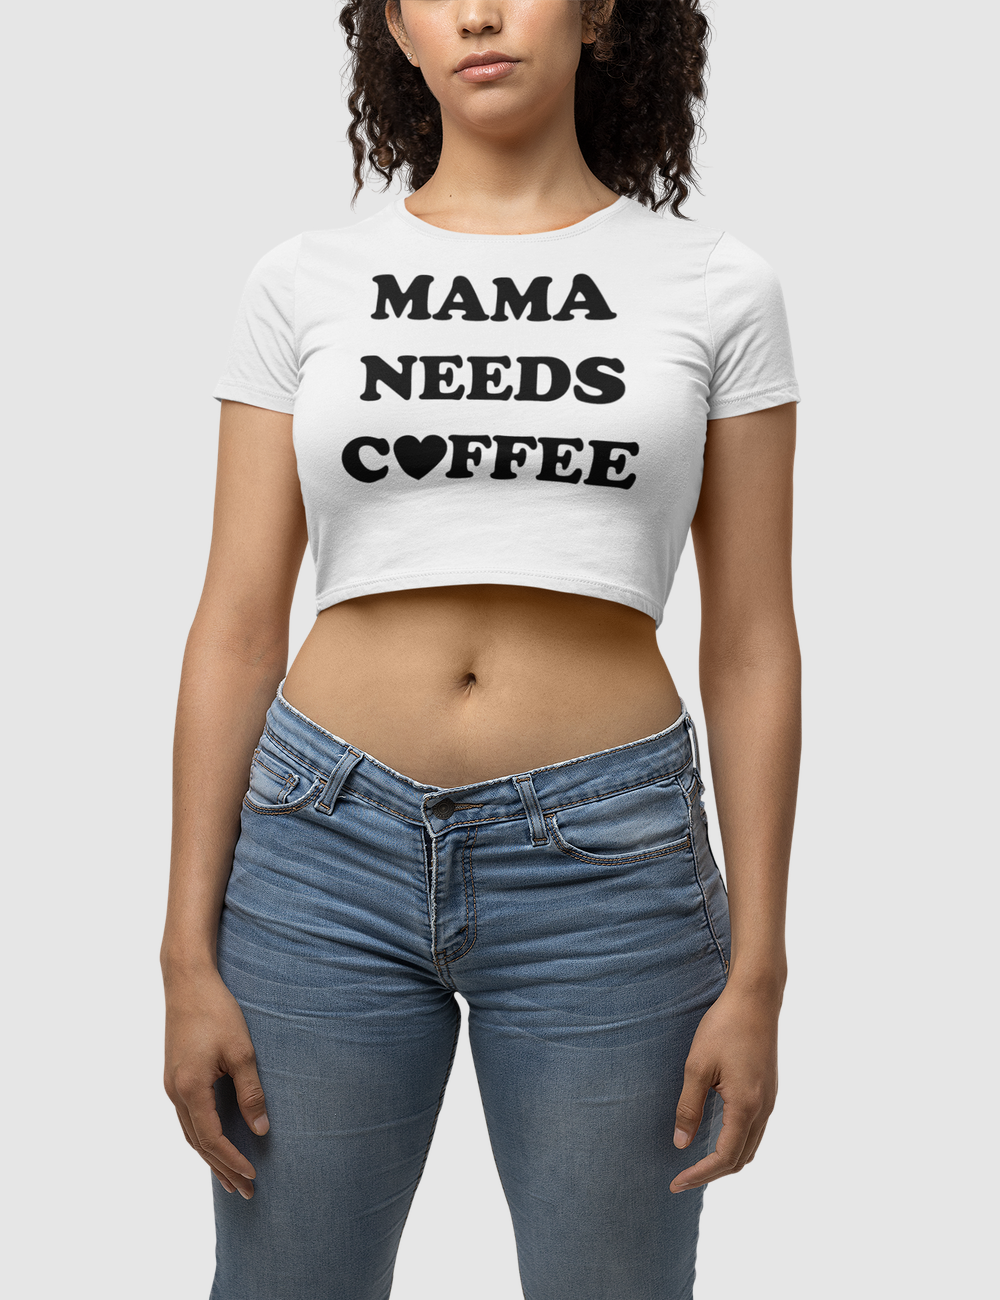 Mama Needs Coffee (Heart Style) Women's Fitted Crop Top T-Shirt OniTakai